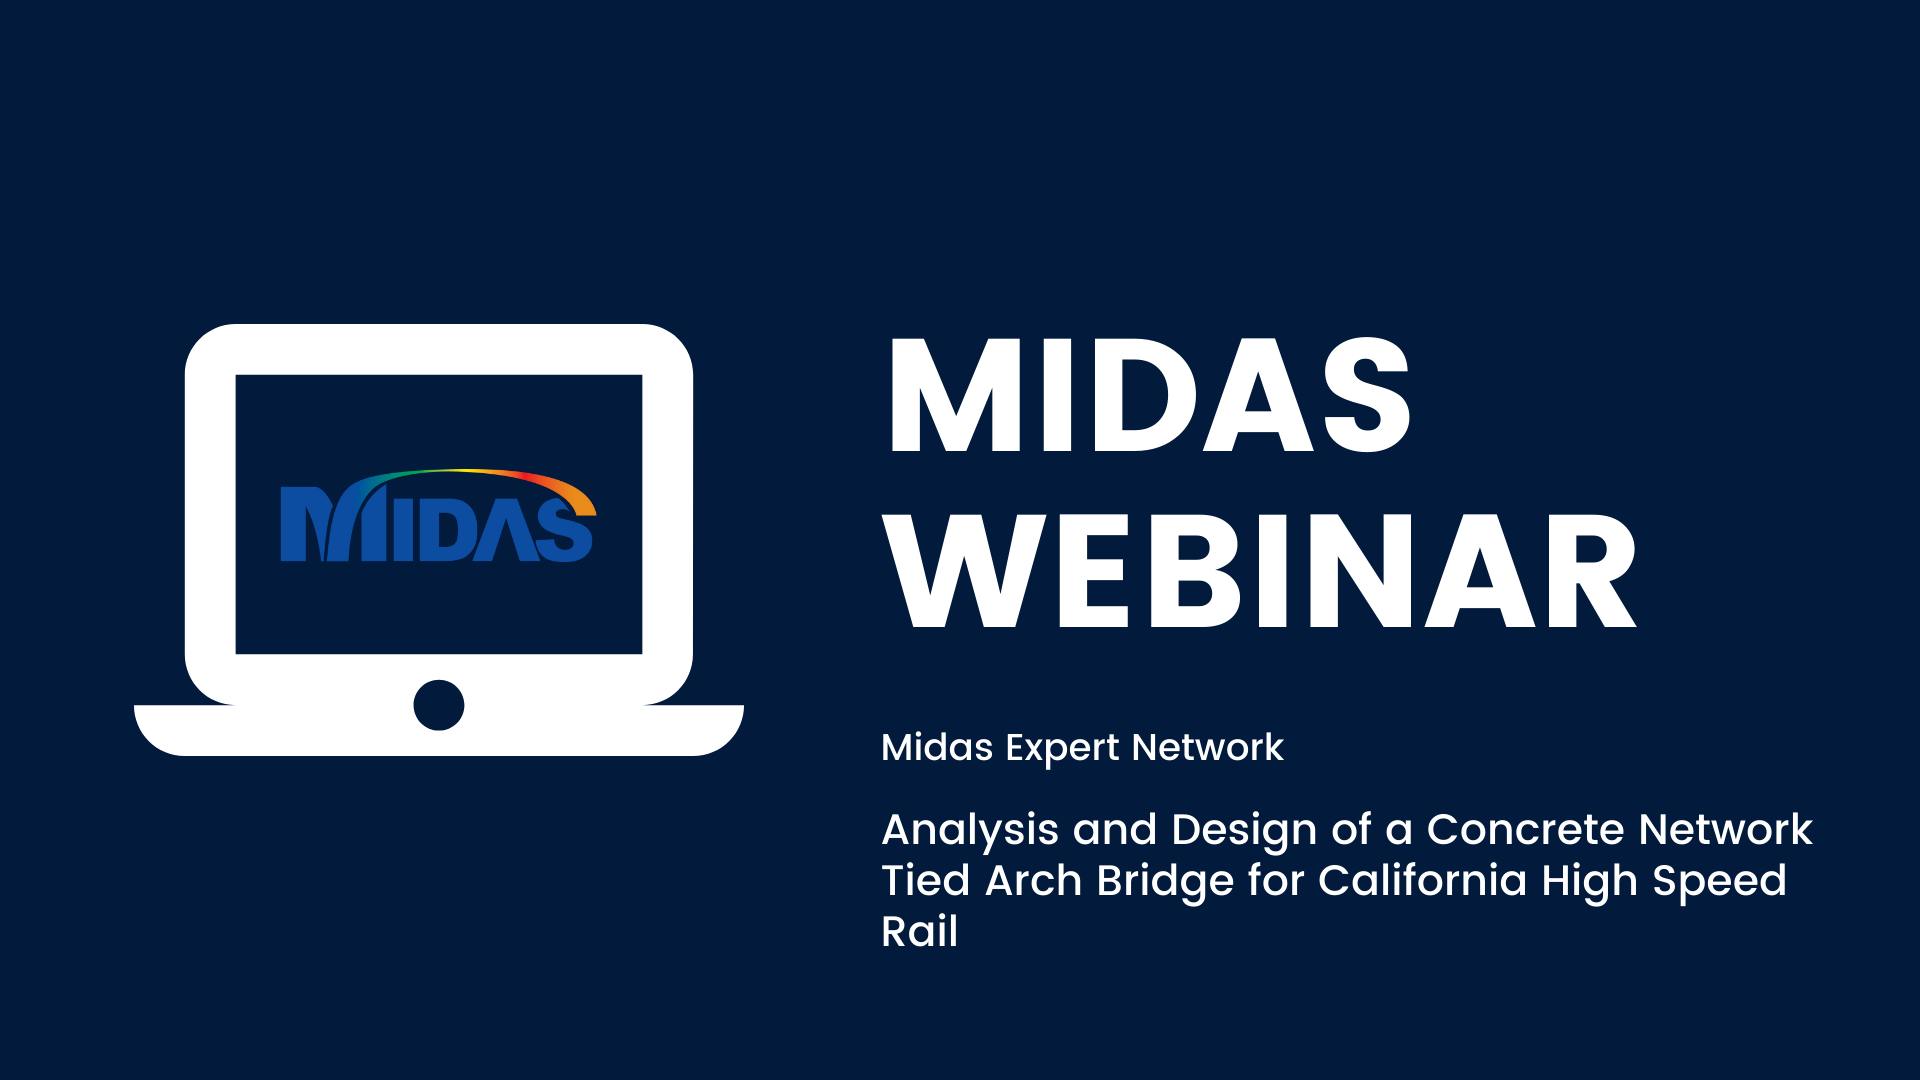 Webinar: Analysis and Design of a Concrete Network Tied Arch Bridge for California High Speed Rail